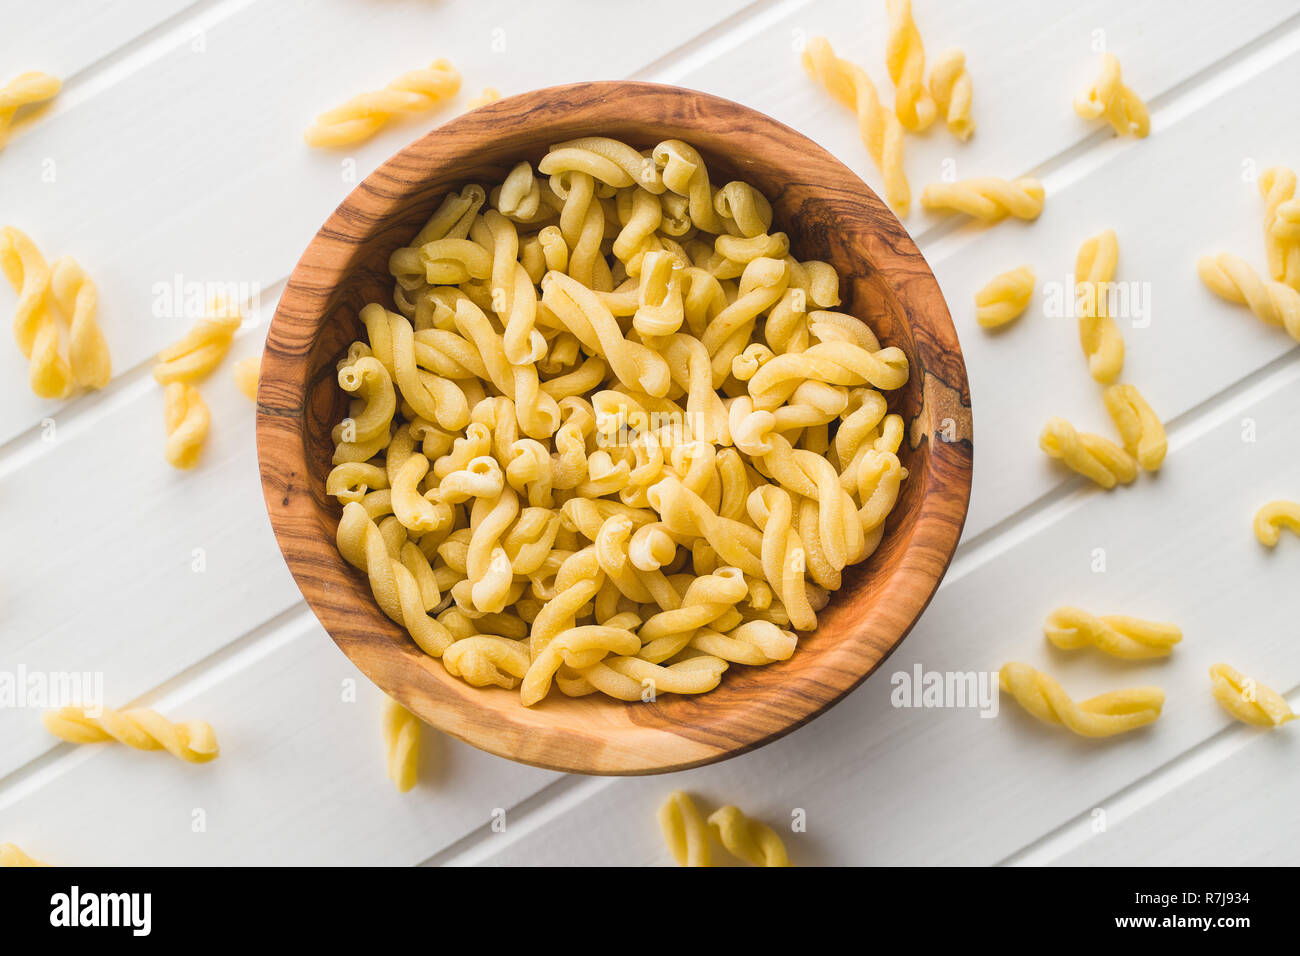 Uncooked gemelli pasta in wooden bowl. Stock Photo